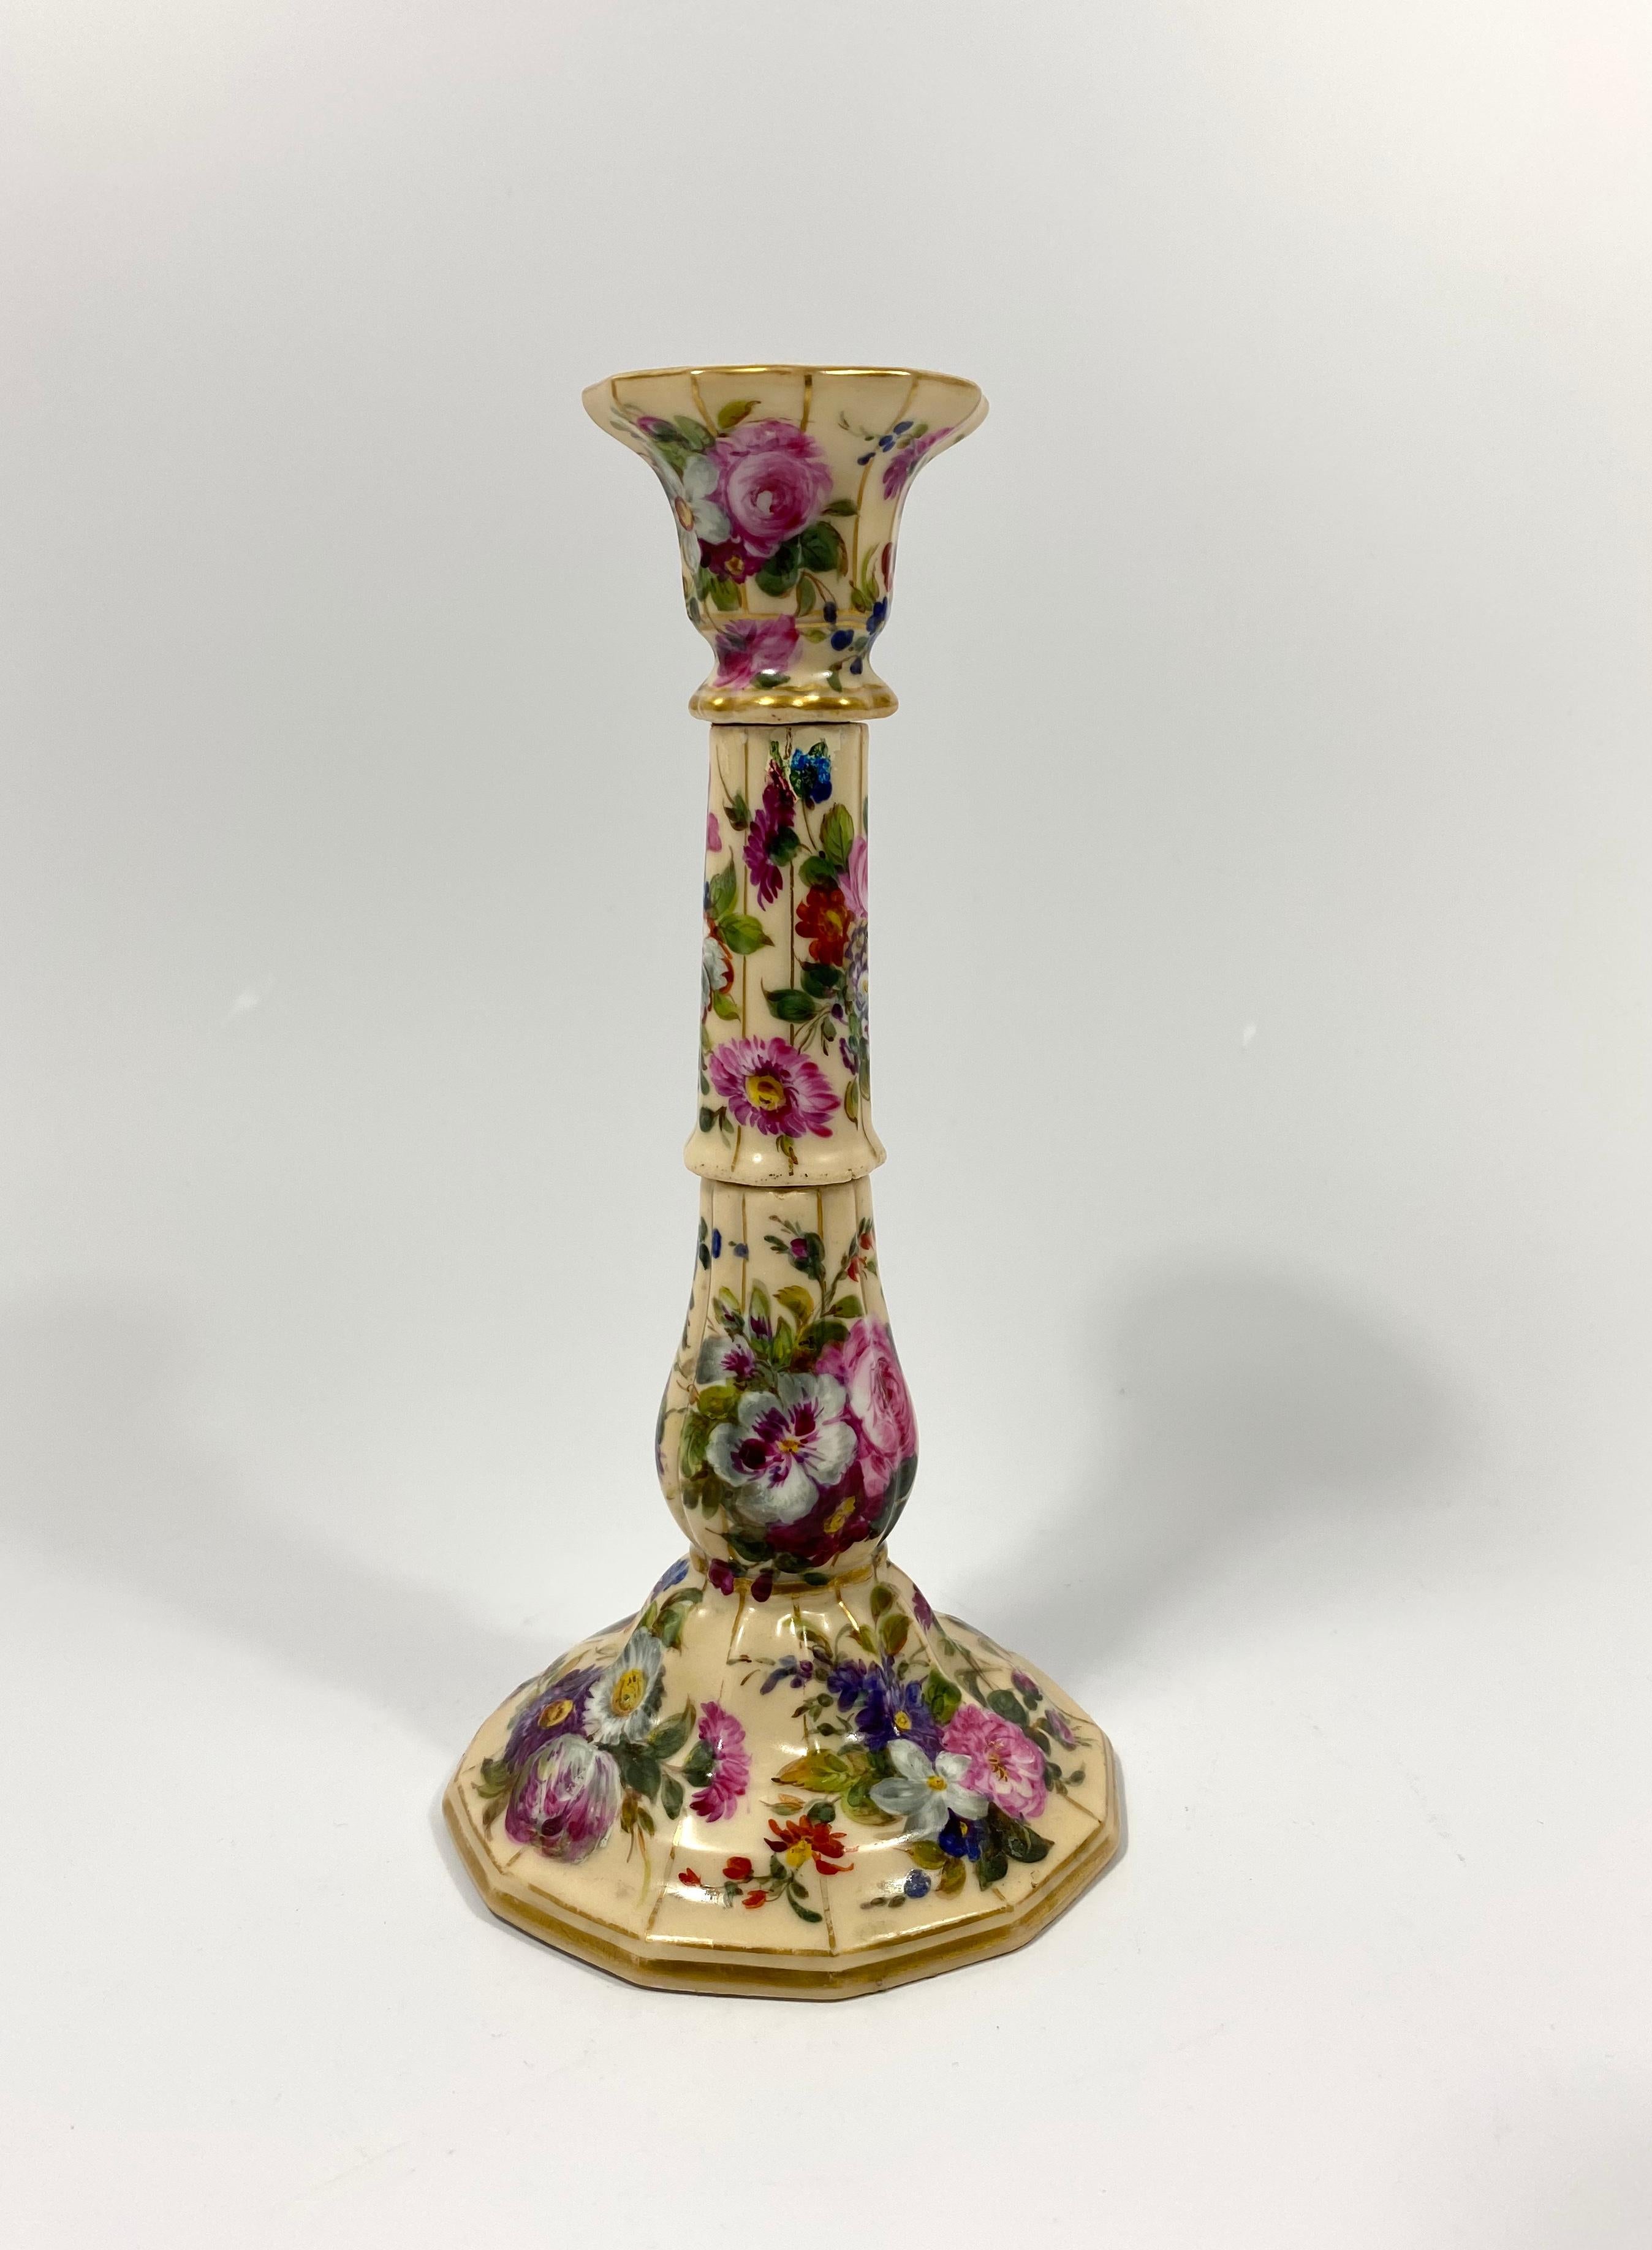 Pair of Paris porcelain candlesticks, probably Jacob petit, circa 1840. The elegant, fluted candlesticks, formed as separate porcelain sections, bolted together. Beautifully hand painted with a profusion of Spring flowers, between gilt borders, upon